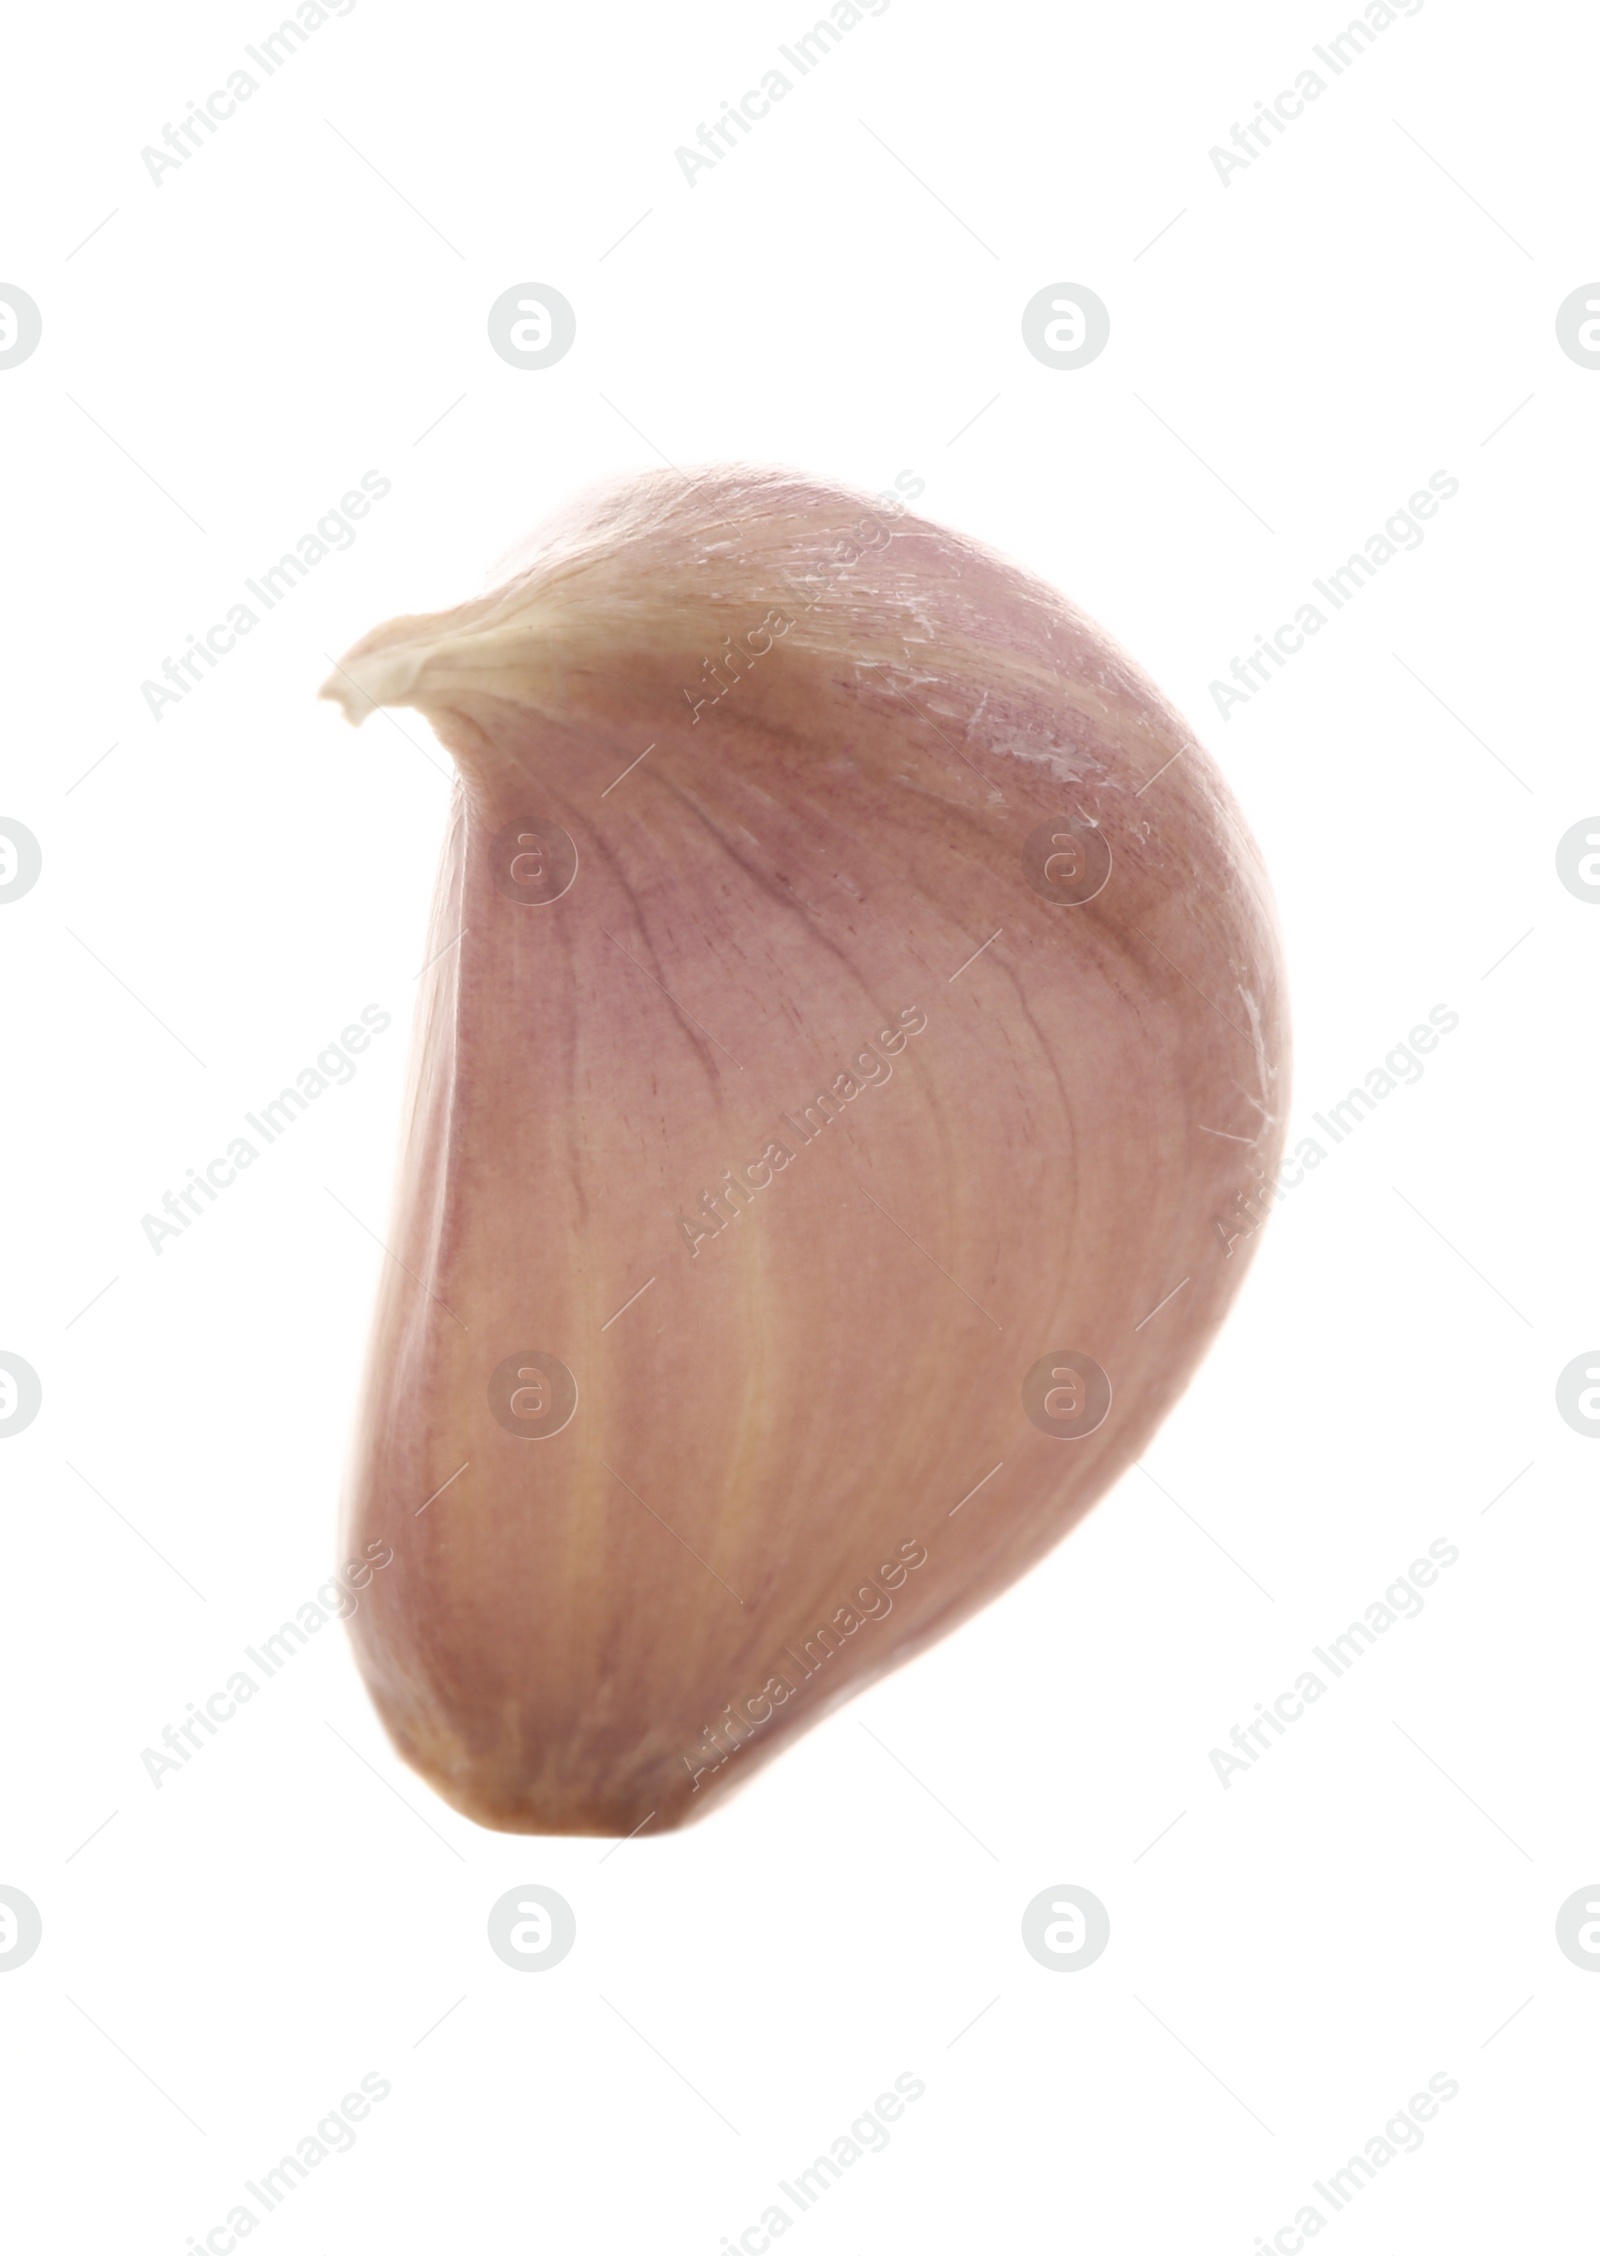 Photo of One unpeeled clove of garlic isolated on white